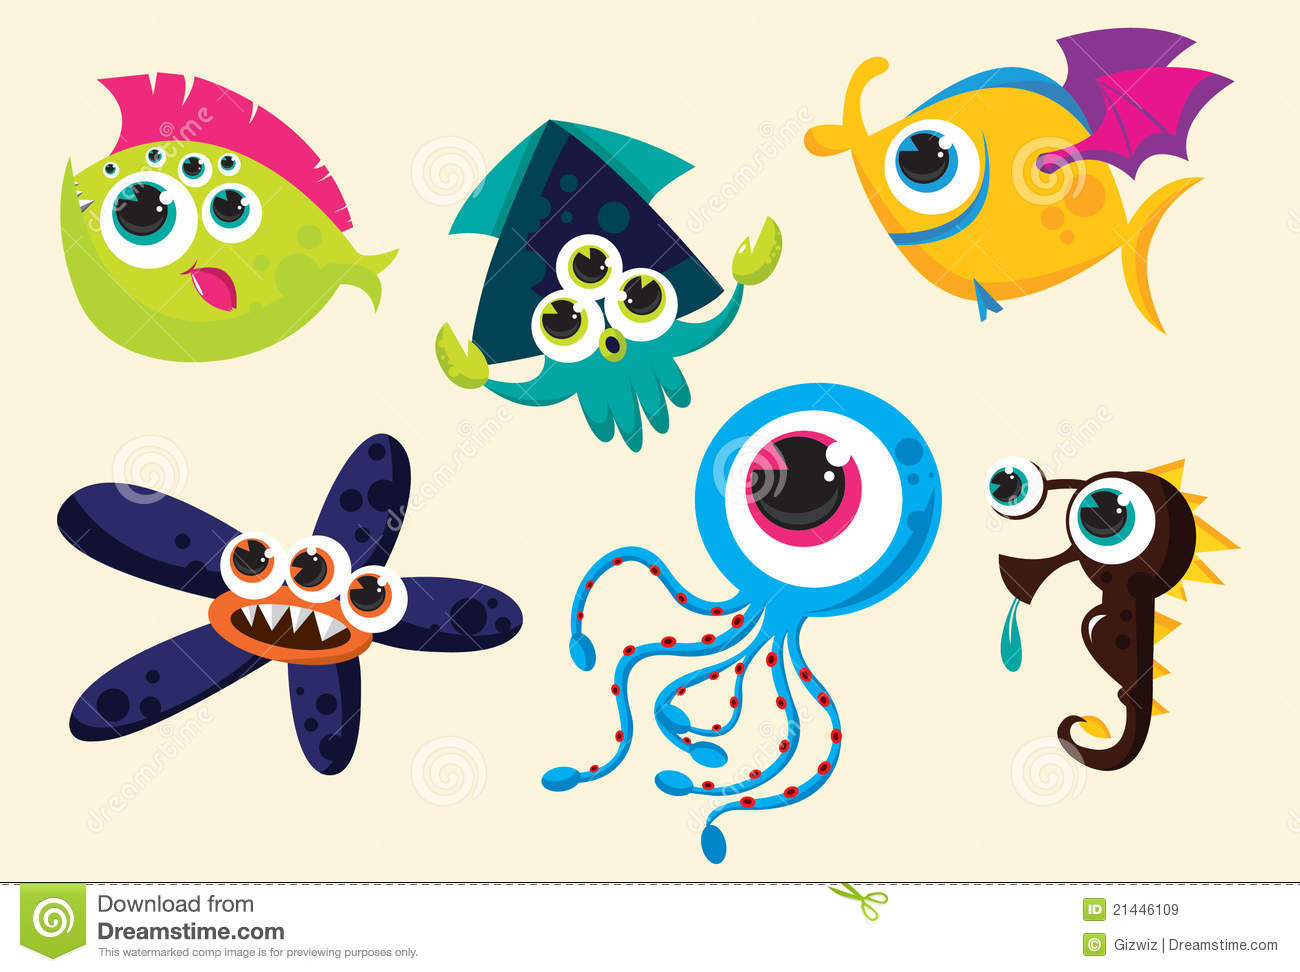 Weird Underwater Creatures Royalty Free Stock Images   Image  21446109